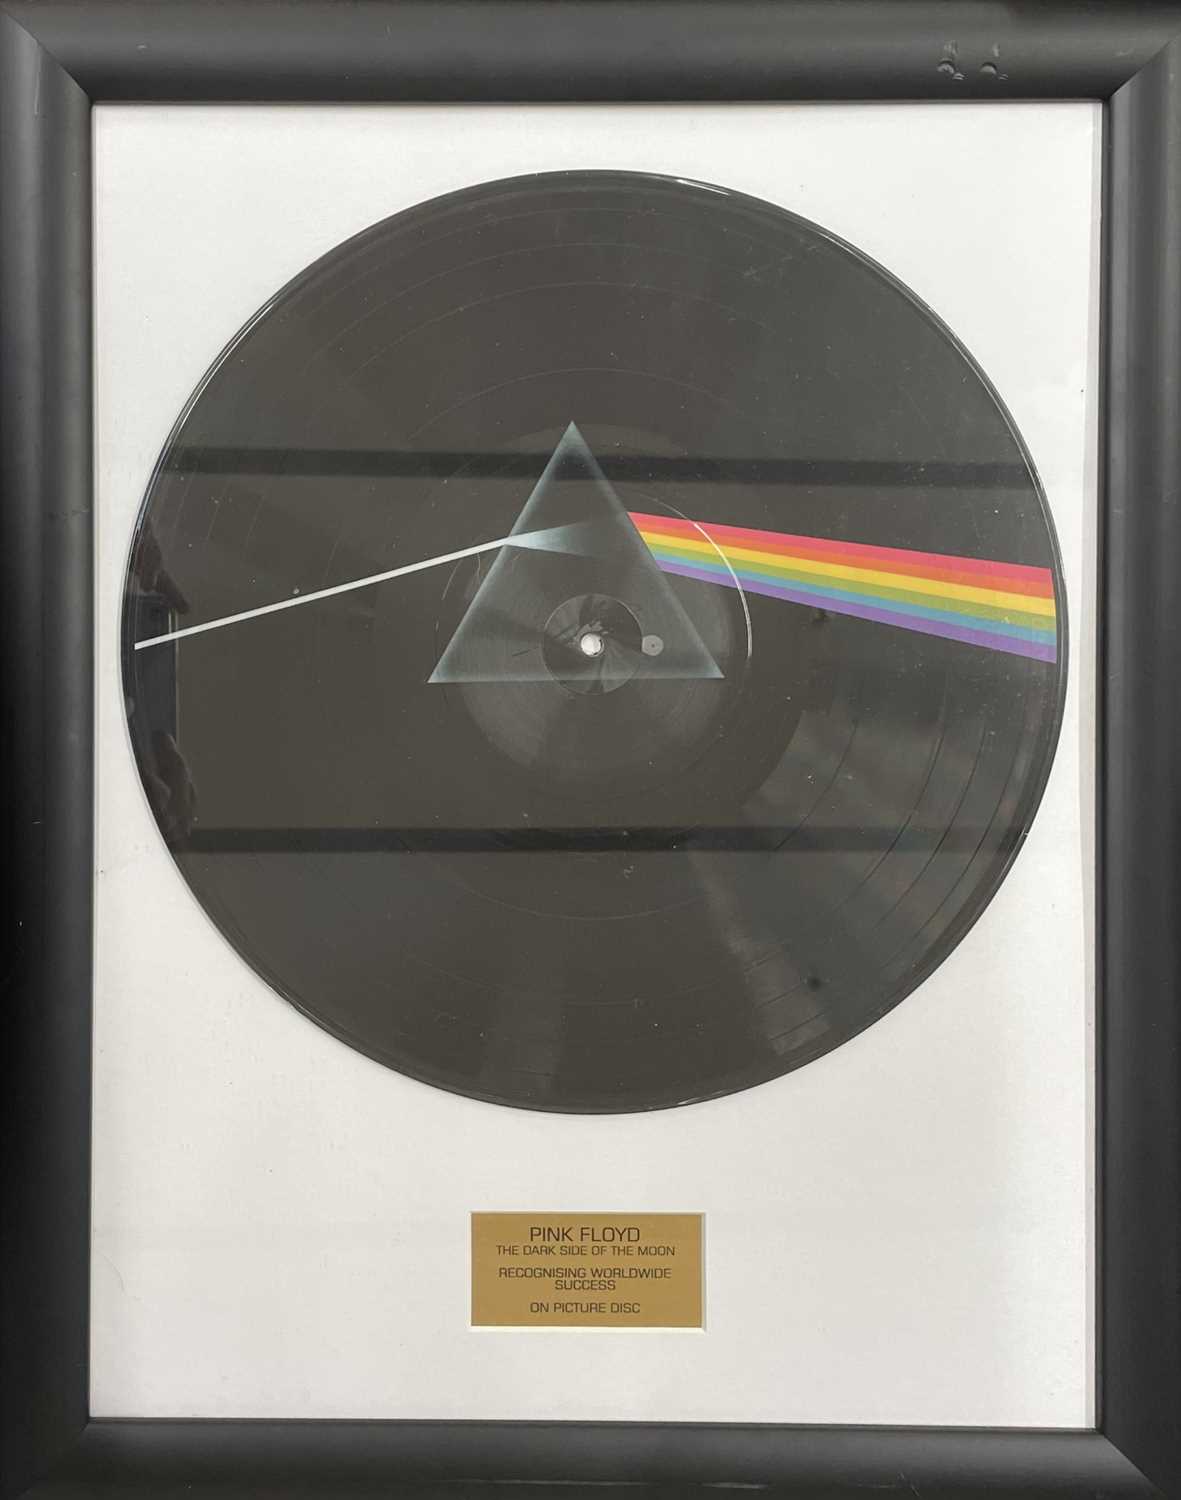 PINK FLOYD: DARK SIDE OF THE MOON: Mounted and framed vinyl picture disc LP, to comemmorate the